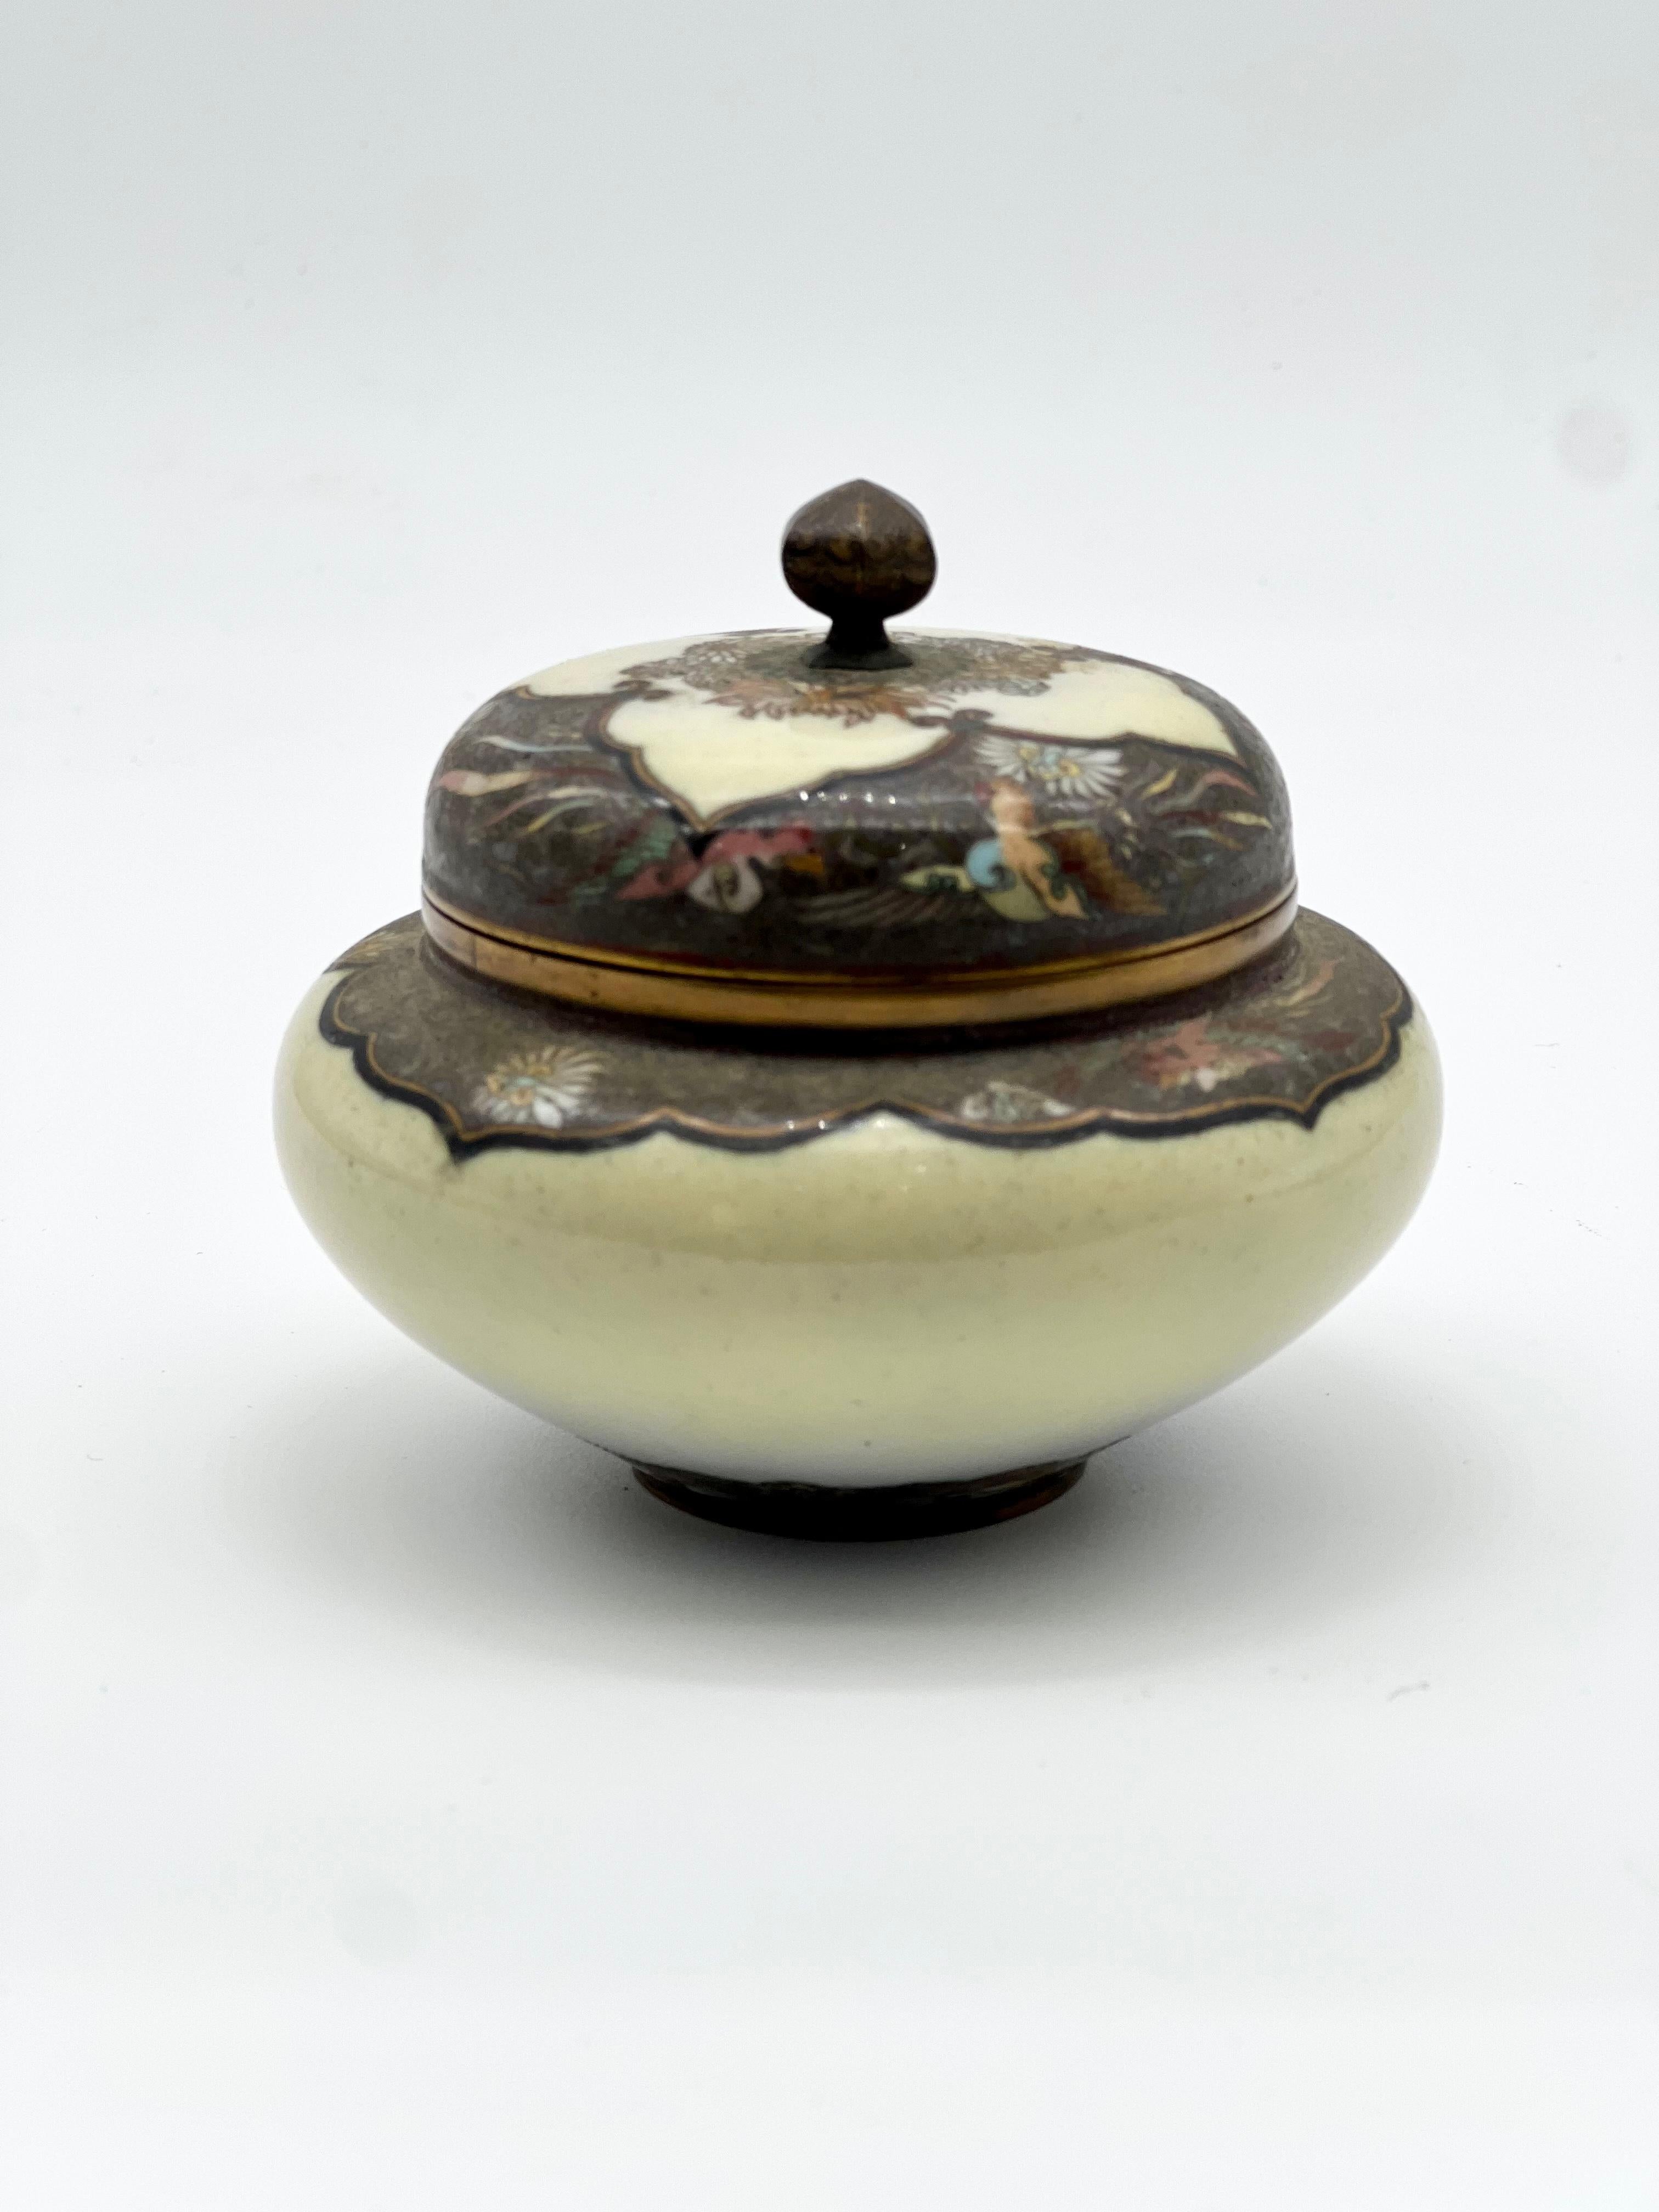 Exquisite Cloisonné Enamel Vase and Cover in the Manner of Namikawa Yasuyuki For Sale 12